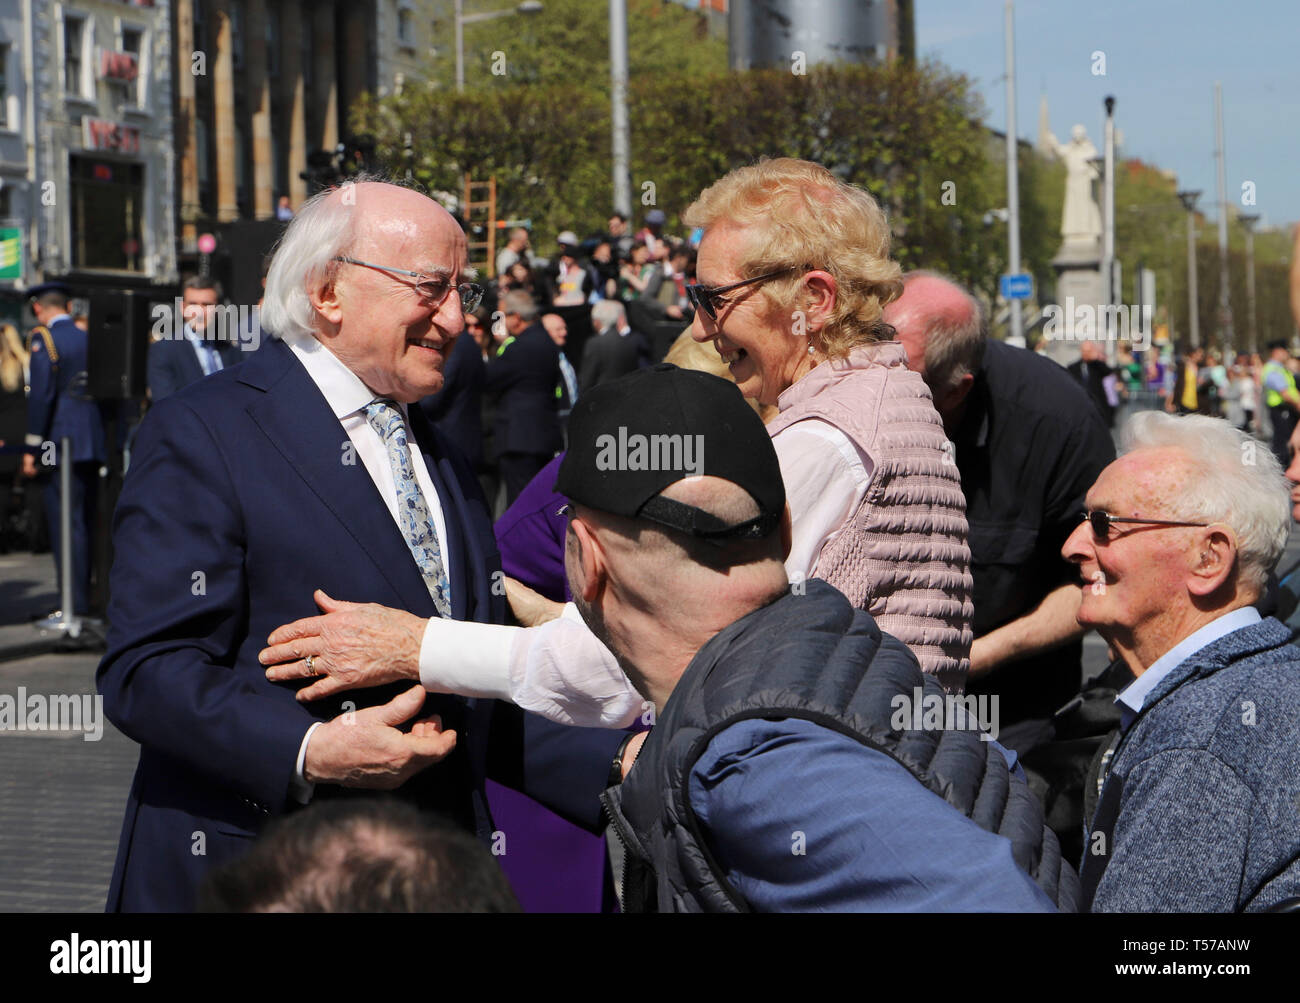 Dublin. 22nd Apr, 2019. Irish President Michael D. Higgins(1st L) talks with local residents during a ceremony commemorating the 103rd anniversary of Easter Rising in Dublin, Ireland, April 21, 2019. The Easter Rising is an armed insurrection launched by the Irish republicans to end the British rule in Ireland. It began on Easter Monday, April 24, 1916, and last for six days. Credit: Xinhua/Alamy Live News Stock Photo